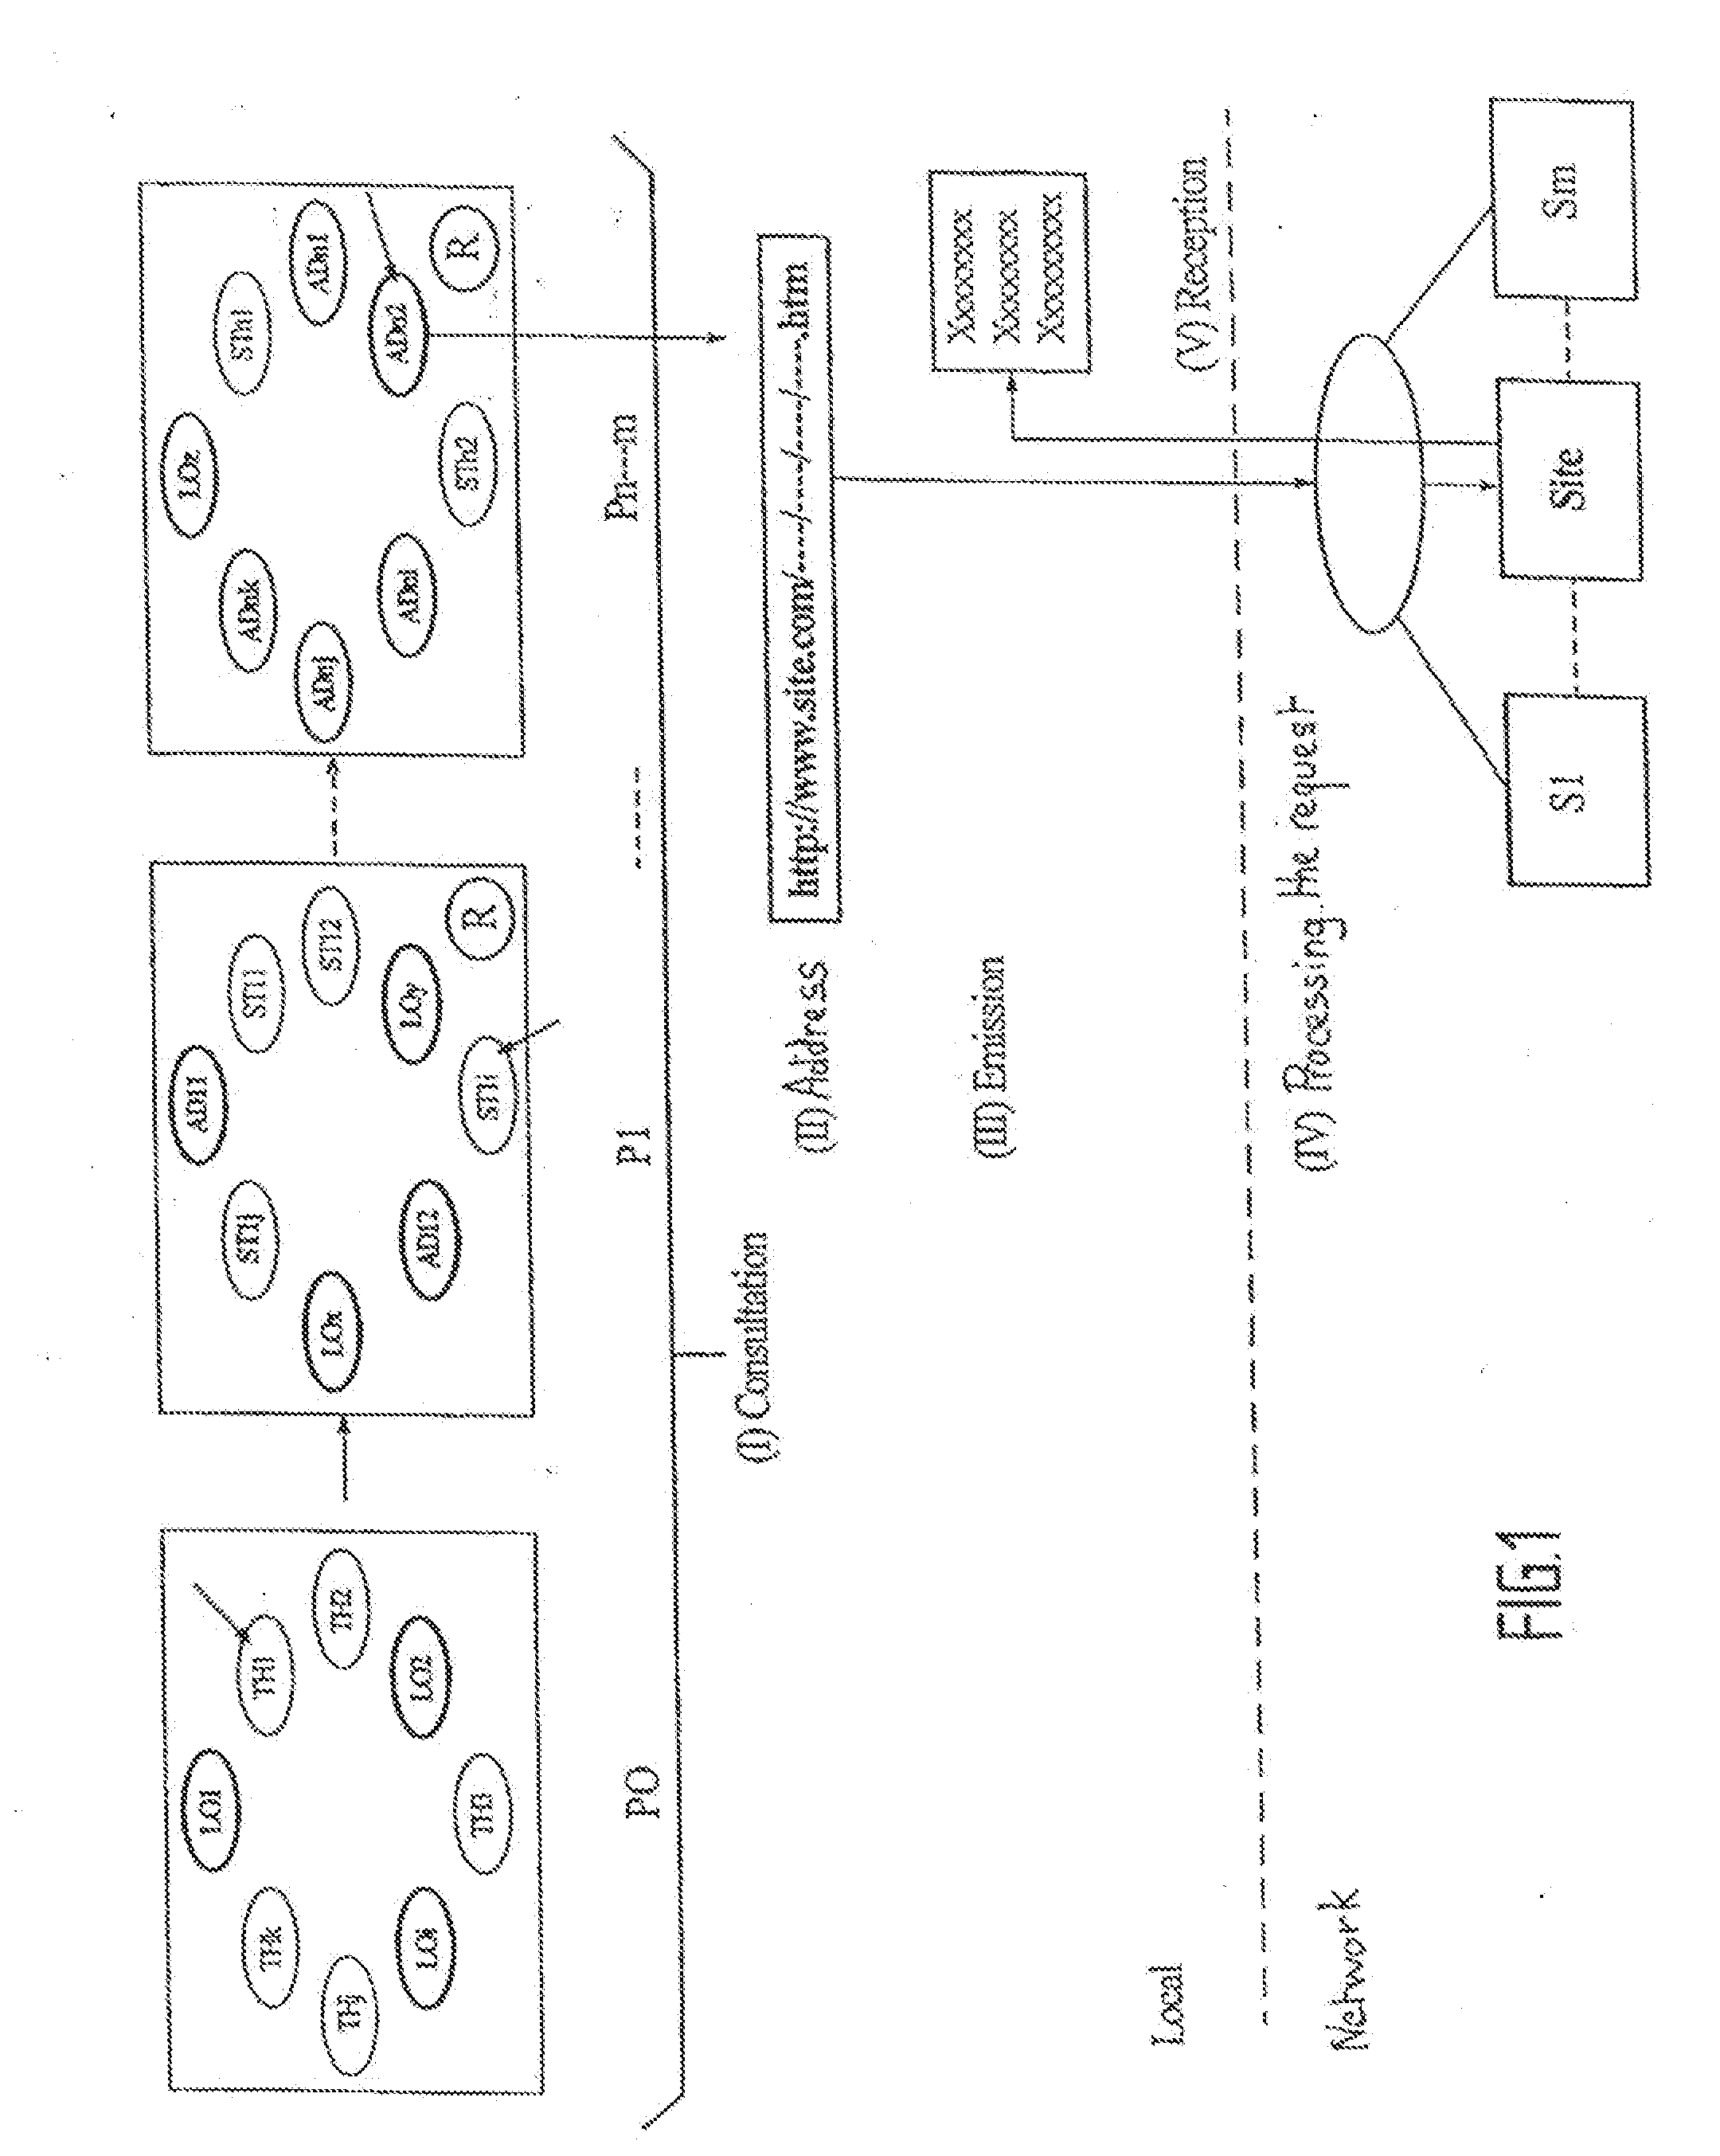 Method and device for accessing sources and services on the web